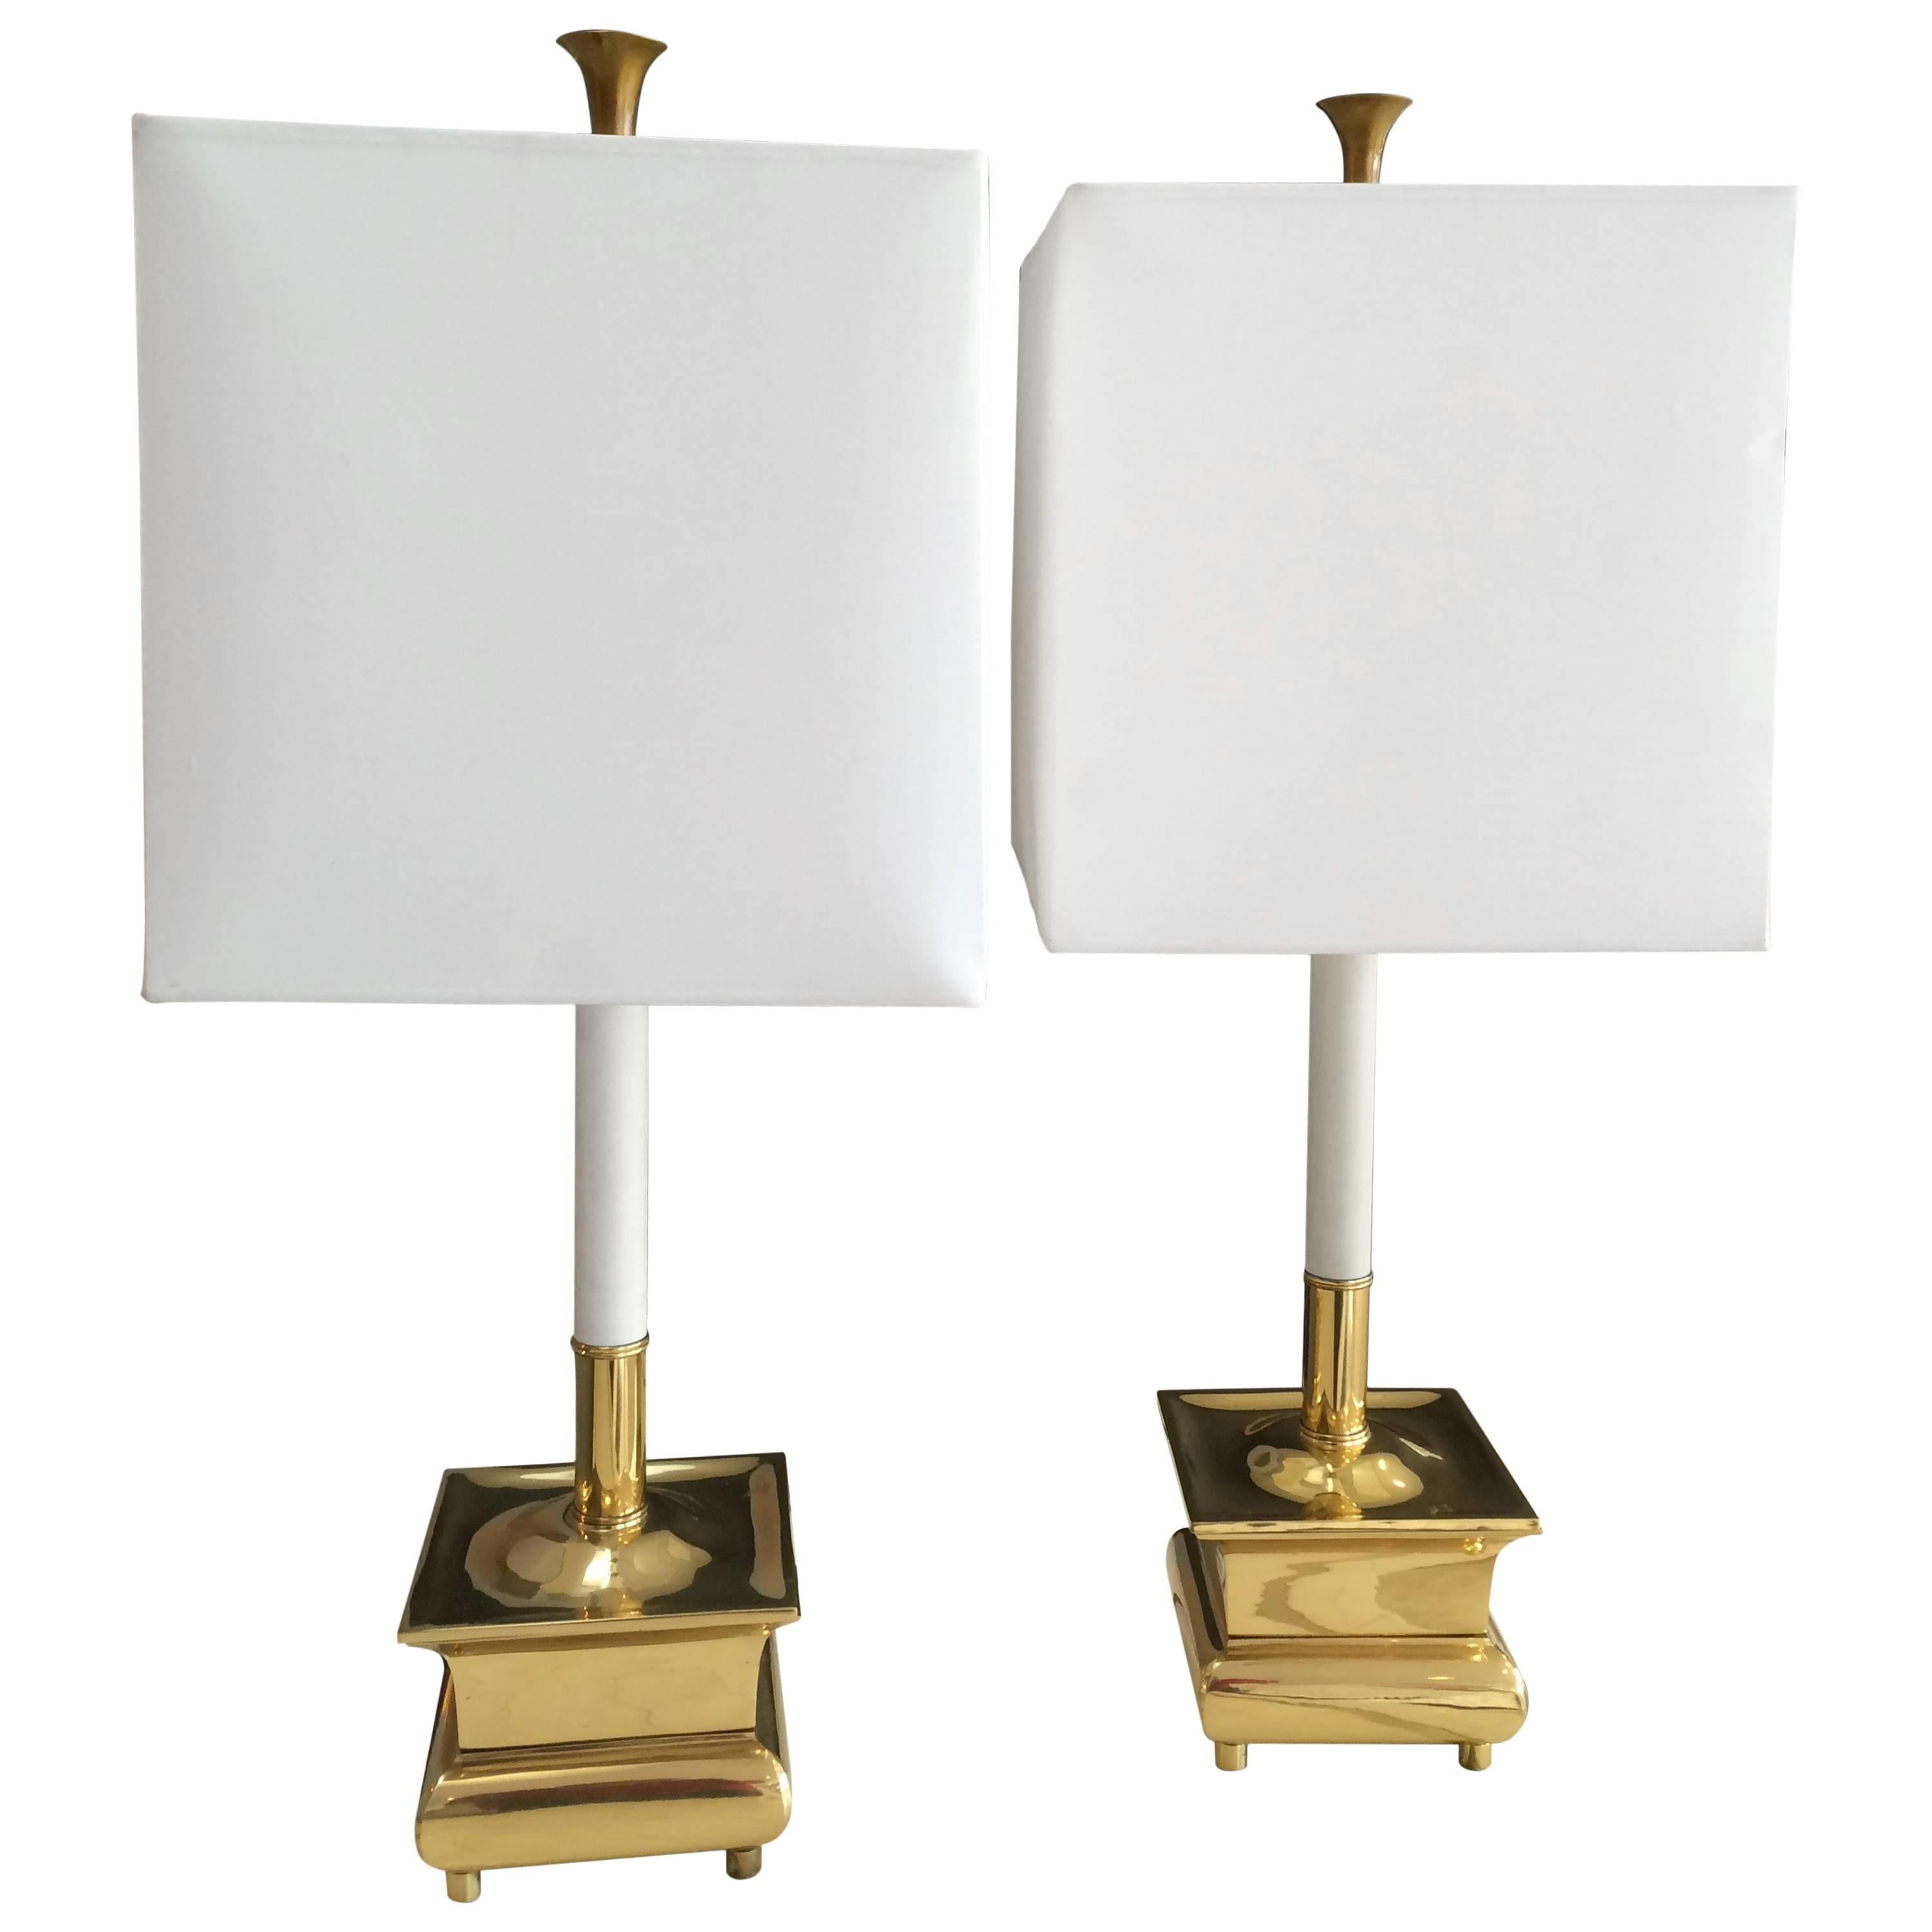 Pair of Exquisite Brass Candle Stick Lamps with Shades